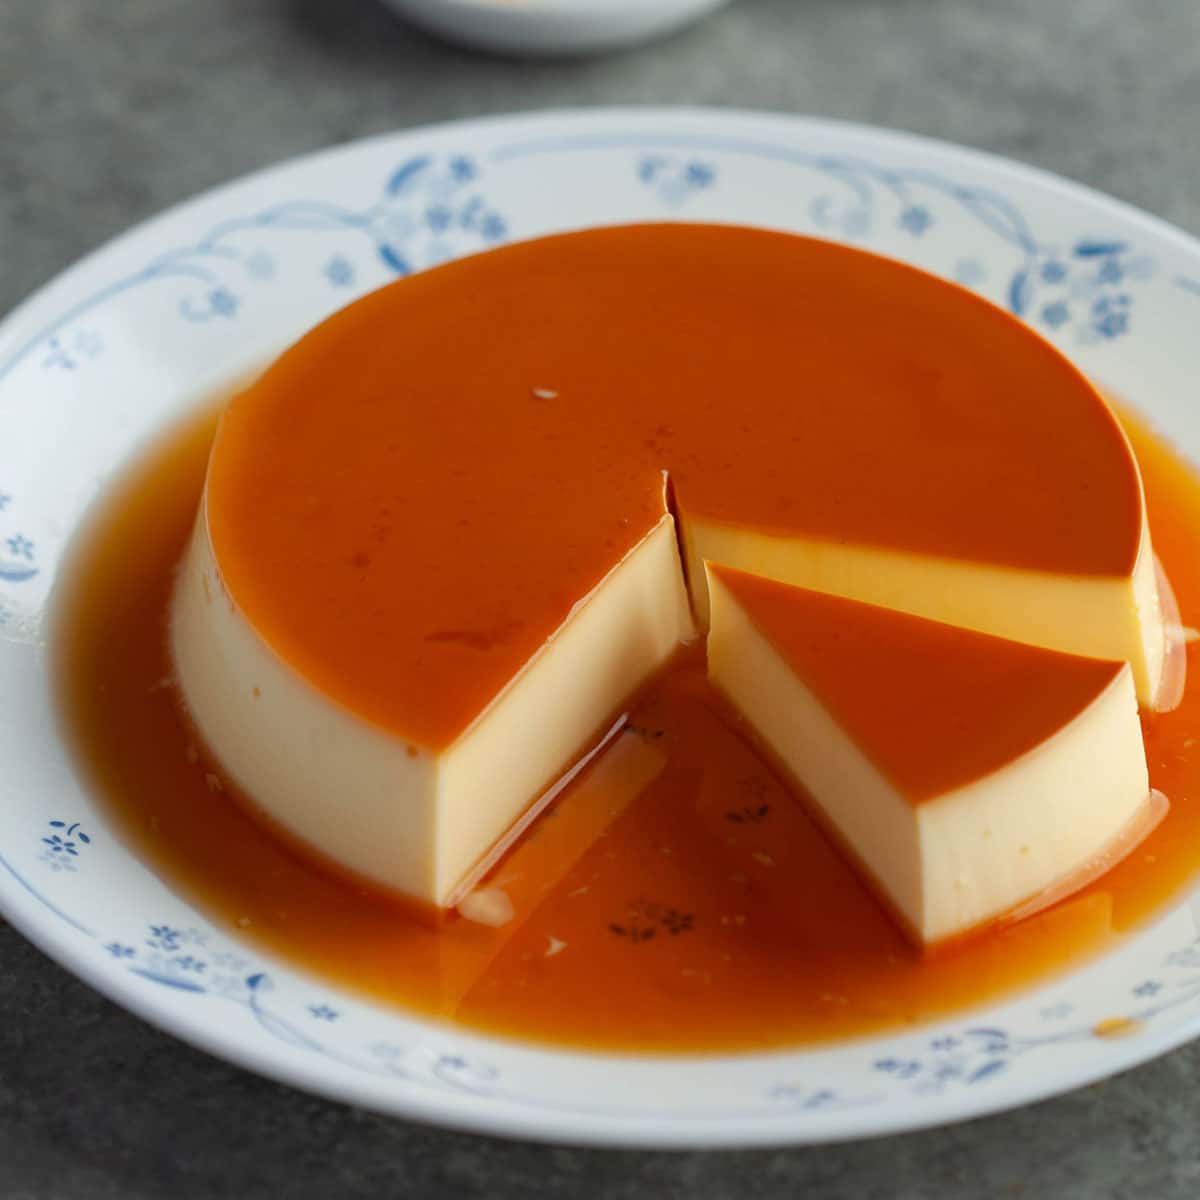 Before storing flan in the fridge, you need to allow it to cool down to room temperature. You can keep it on a plate still in its flan ring, or you can remove it from the pan onto a serving plate and refrigerate.